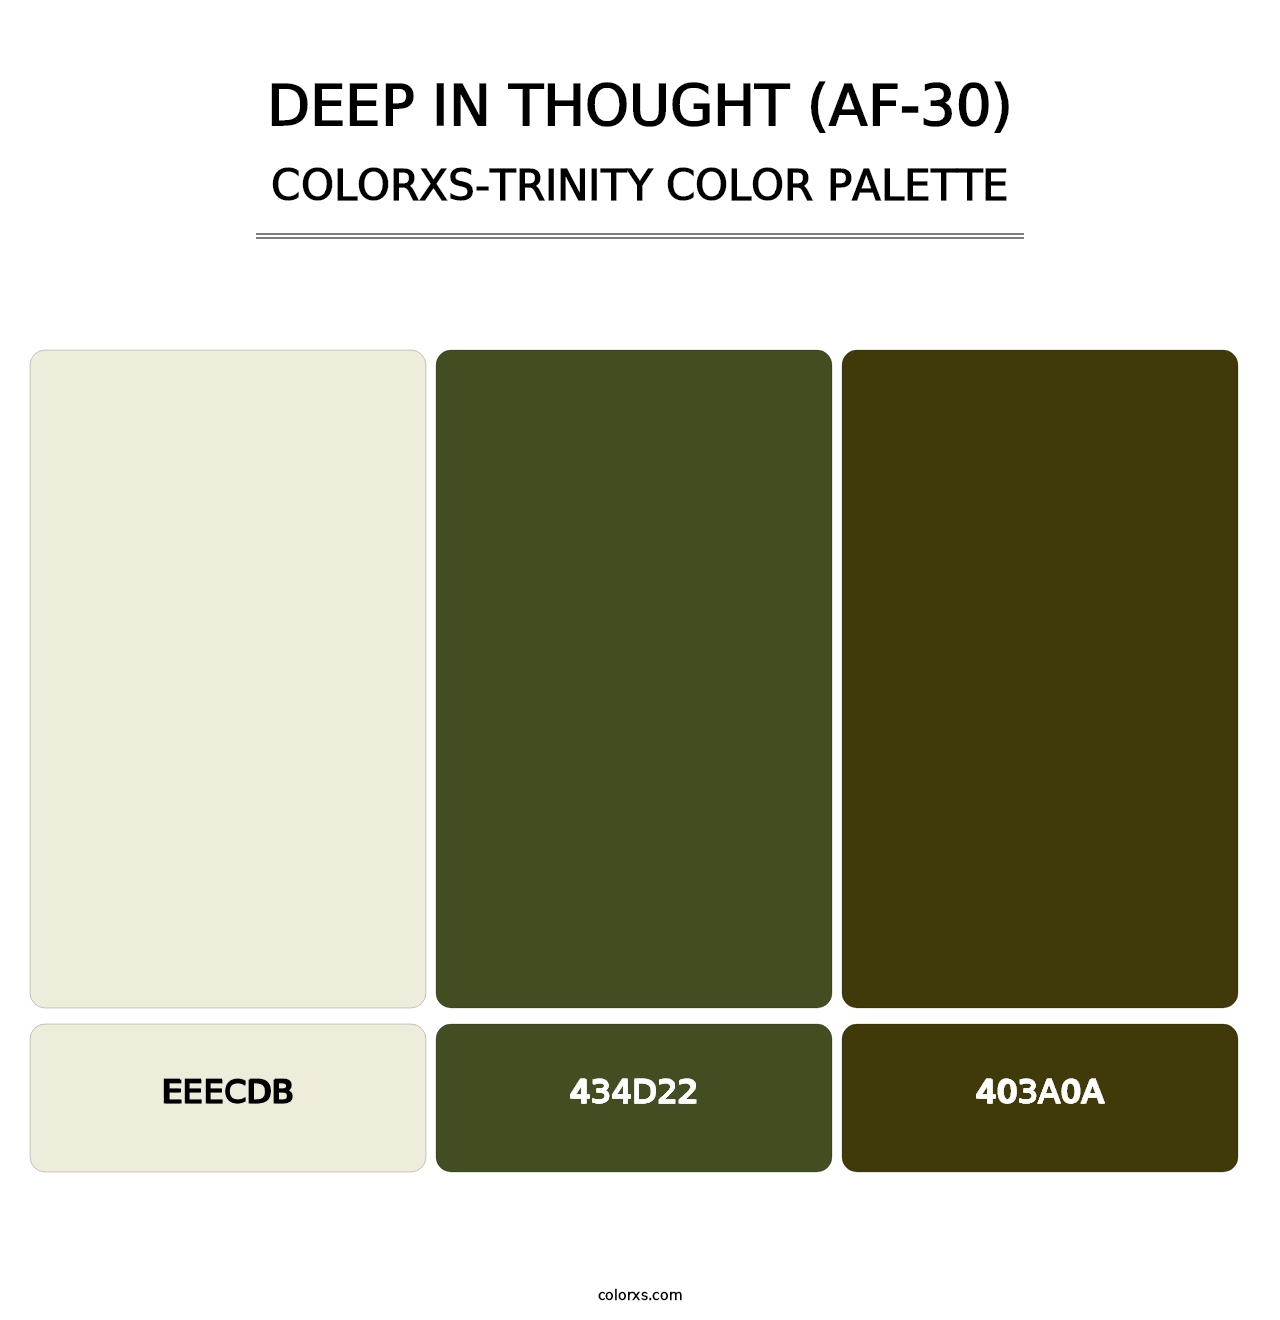 Deep in Thought (AF-30) - Colorxs Trinity Palette